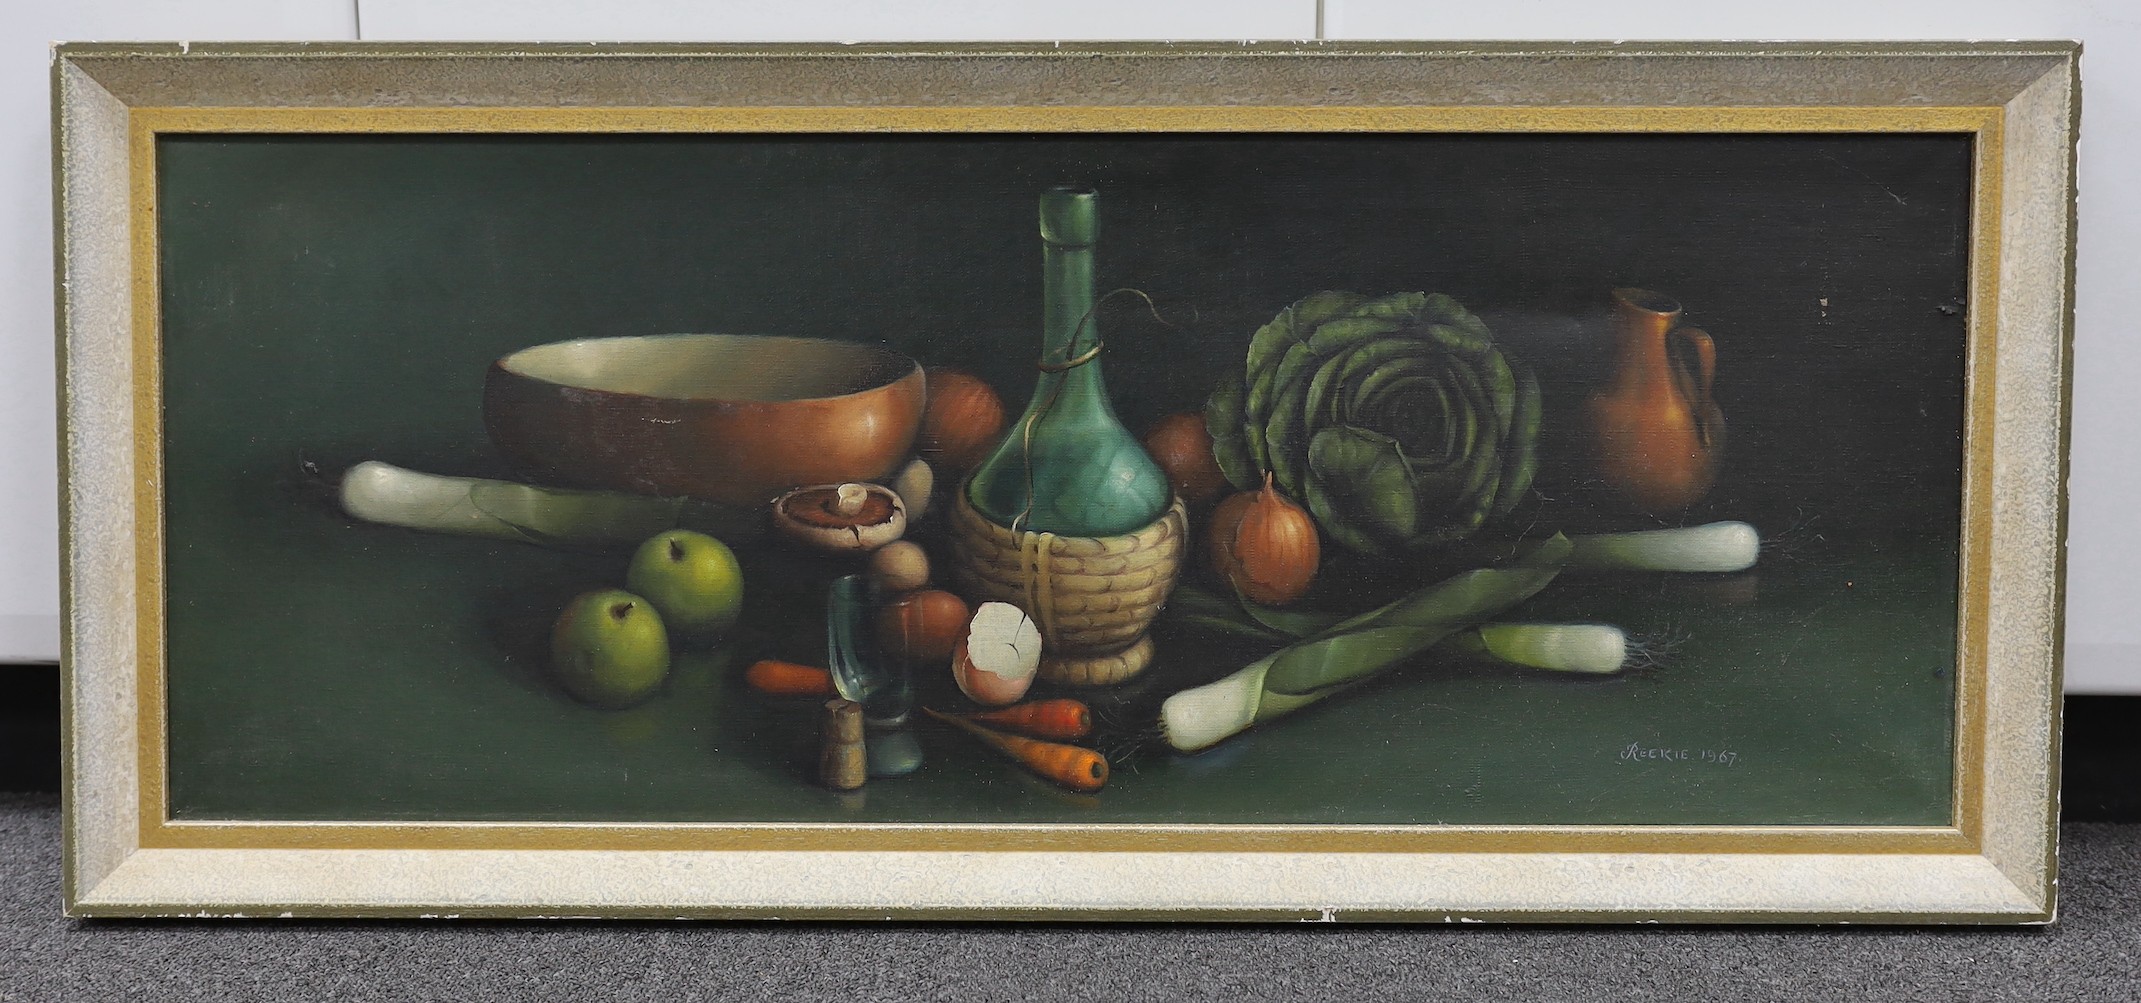 G.L. Reekie, oil on canvas, Earthenware bowl with Chianti bottle, signed and dated 1967, Stacy Marks label verso, 35 x 90cm